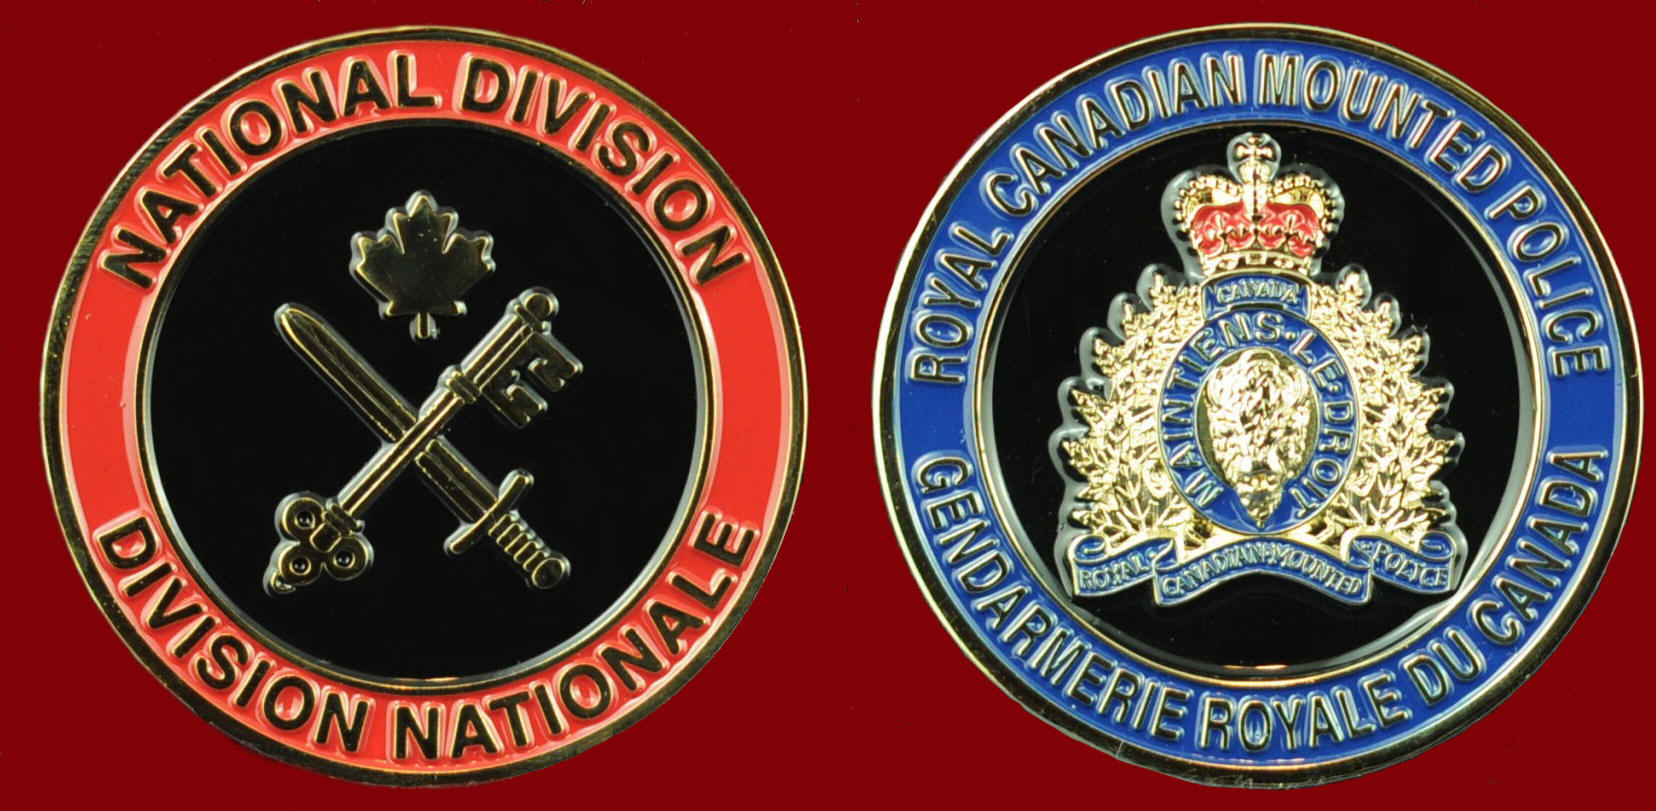 RCMP NATIONAL DIVISION